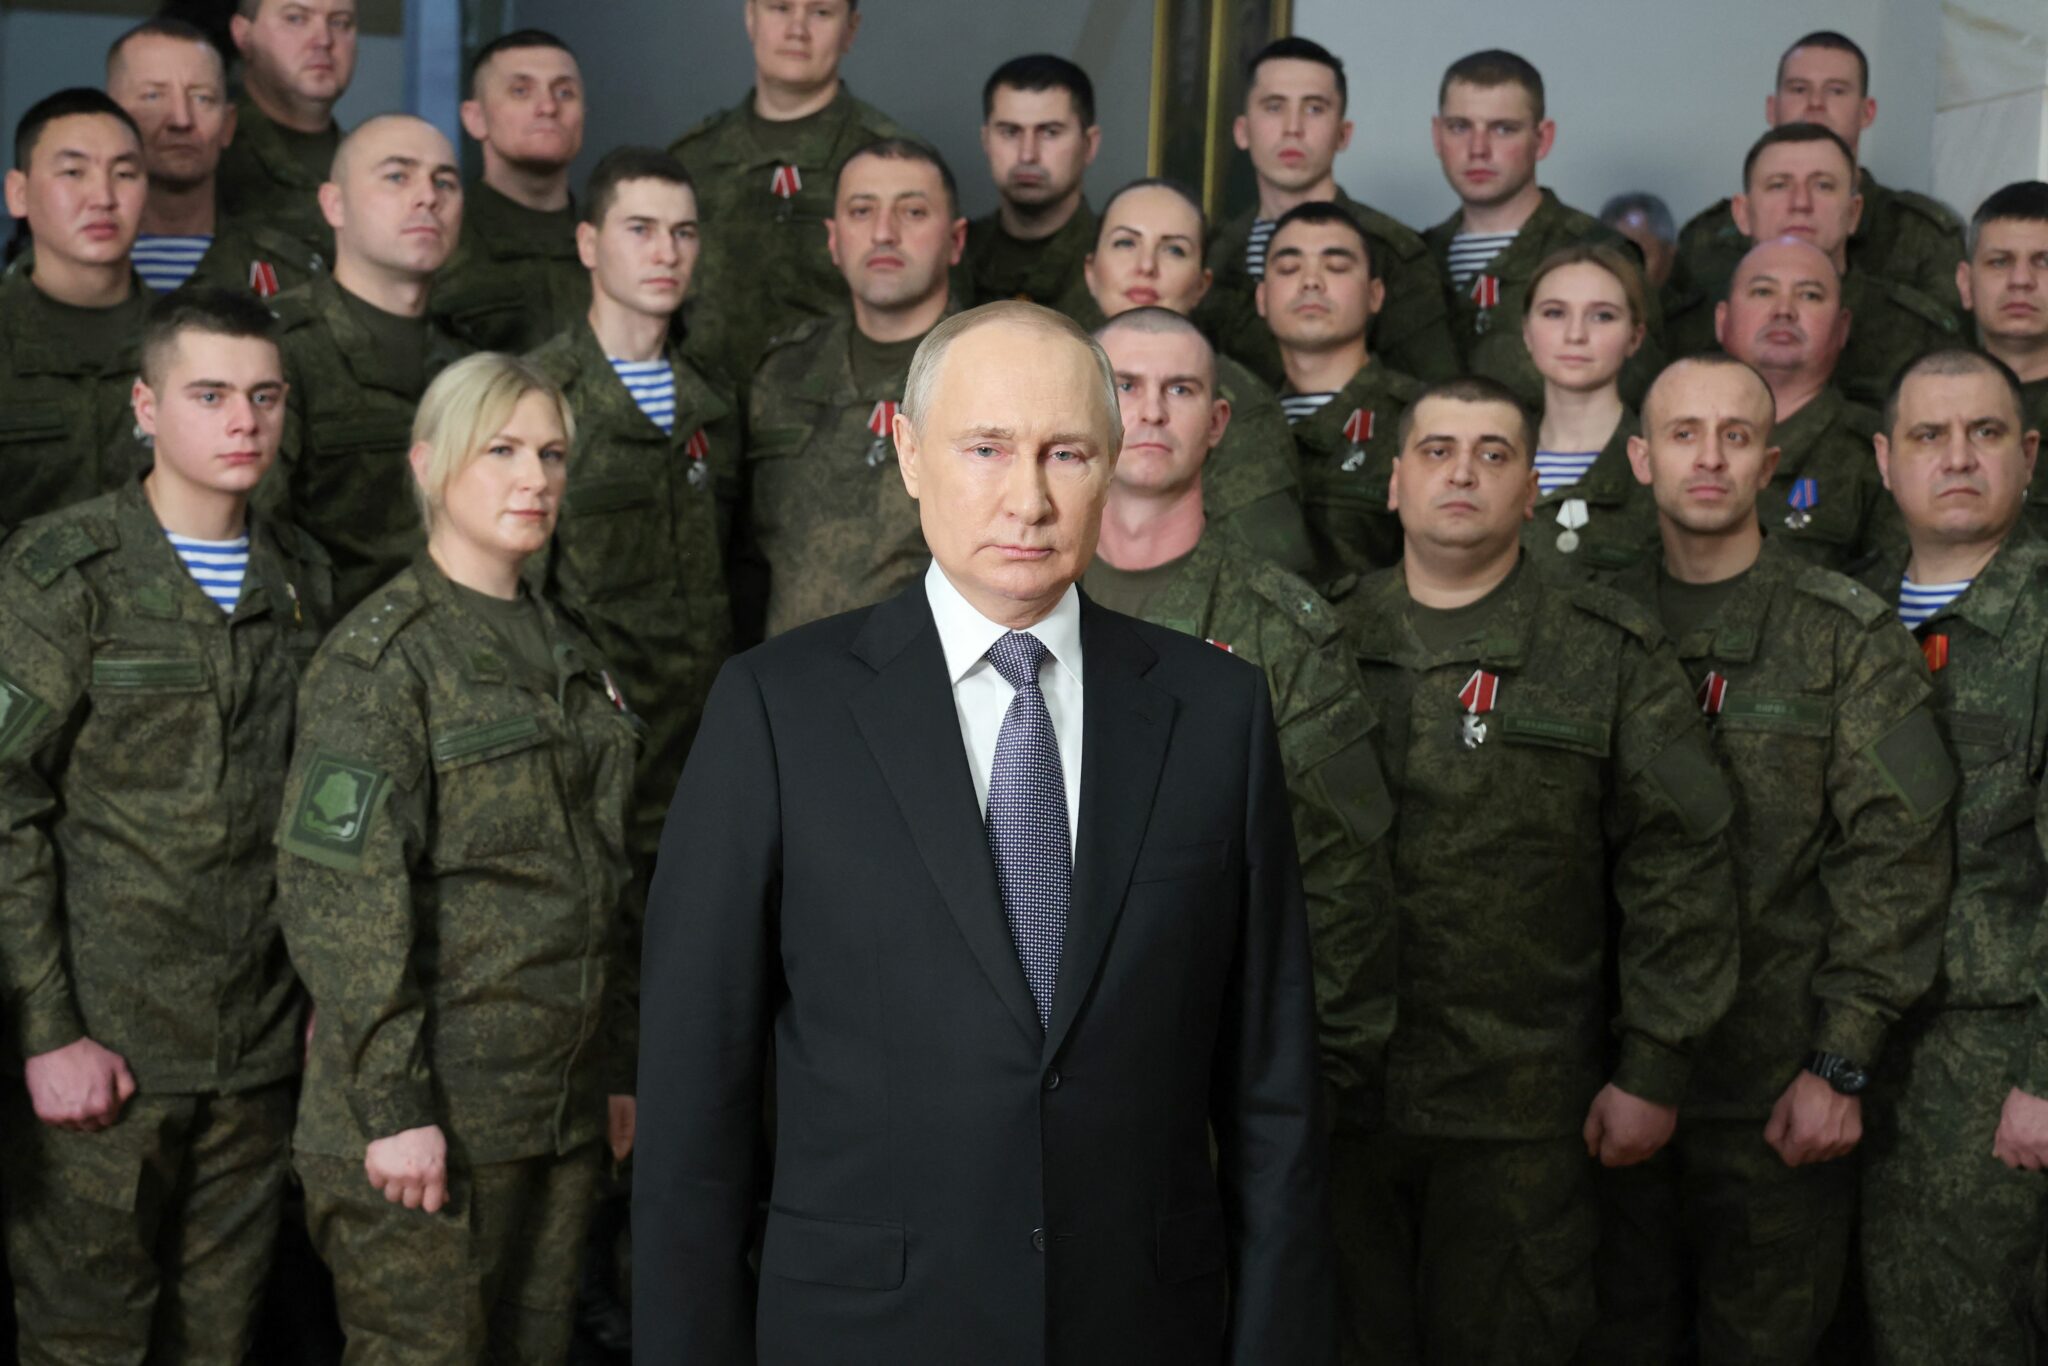 TOPSHOT - Russian President Vladimir Putin poses as he delivers a New Year's address to the nation at the headquarters of the Southern Military District in Rostov-on-Don on December 31, 2022. - - *Editor's note : this image is distributed by Russian state owned agency Sputnik.* (Photo by Mikhail KLIMENTYEV / SPUTNIK / AFP) / *Editor's note : this image is distributed by Russian state owned agency Sputnik.* (Photo by MIKHAIL KLIMENTYEV/SPUTNIK/AFP via Getty Images)